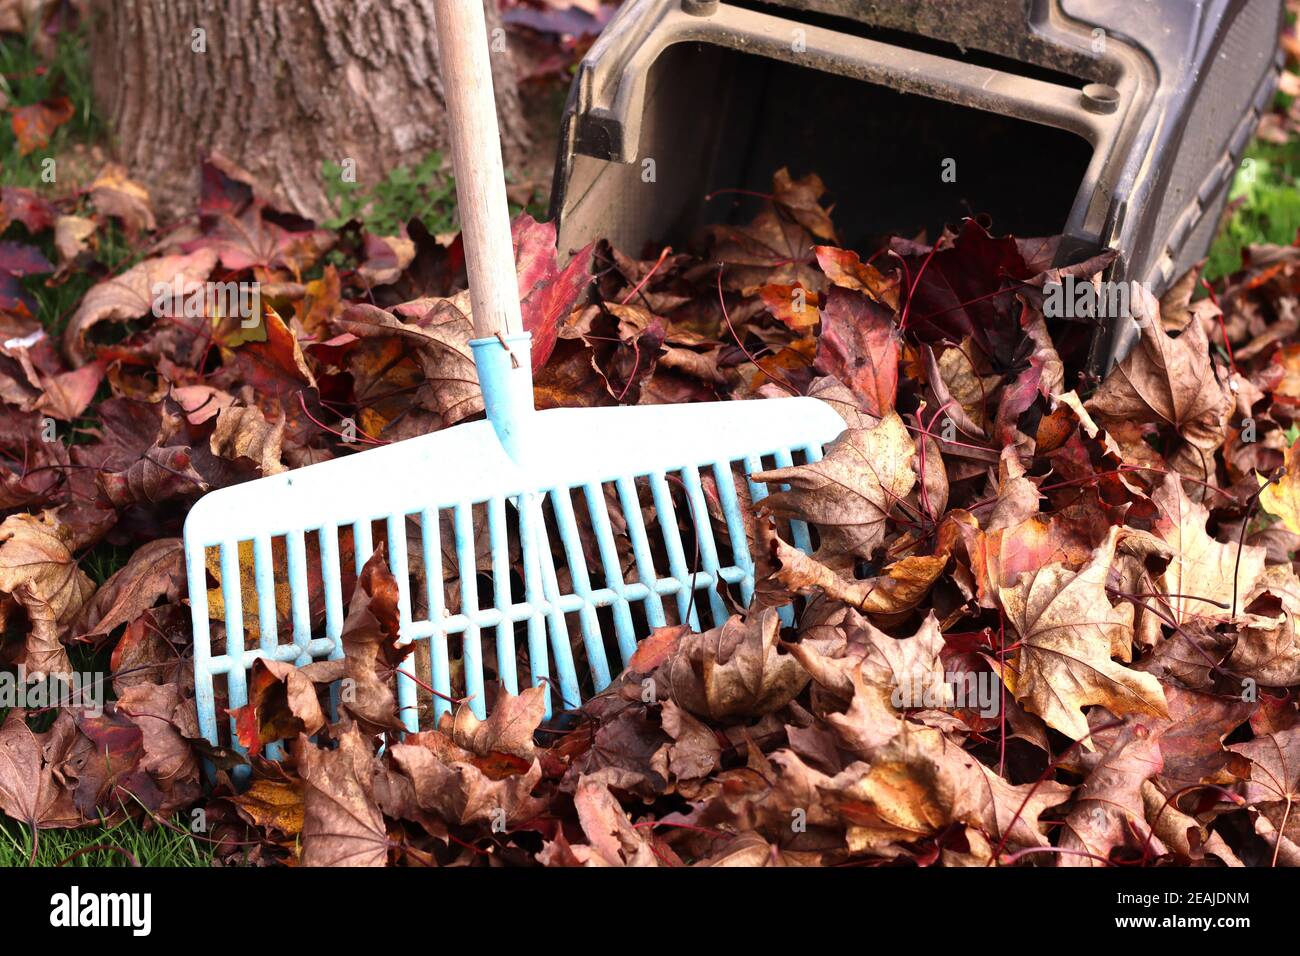 garden tools for collecting leaves Stock Photo